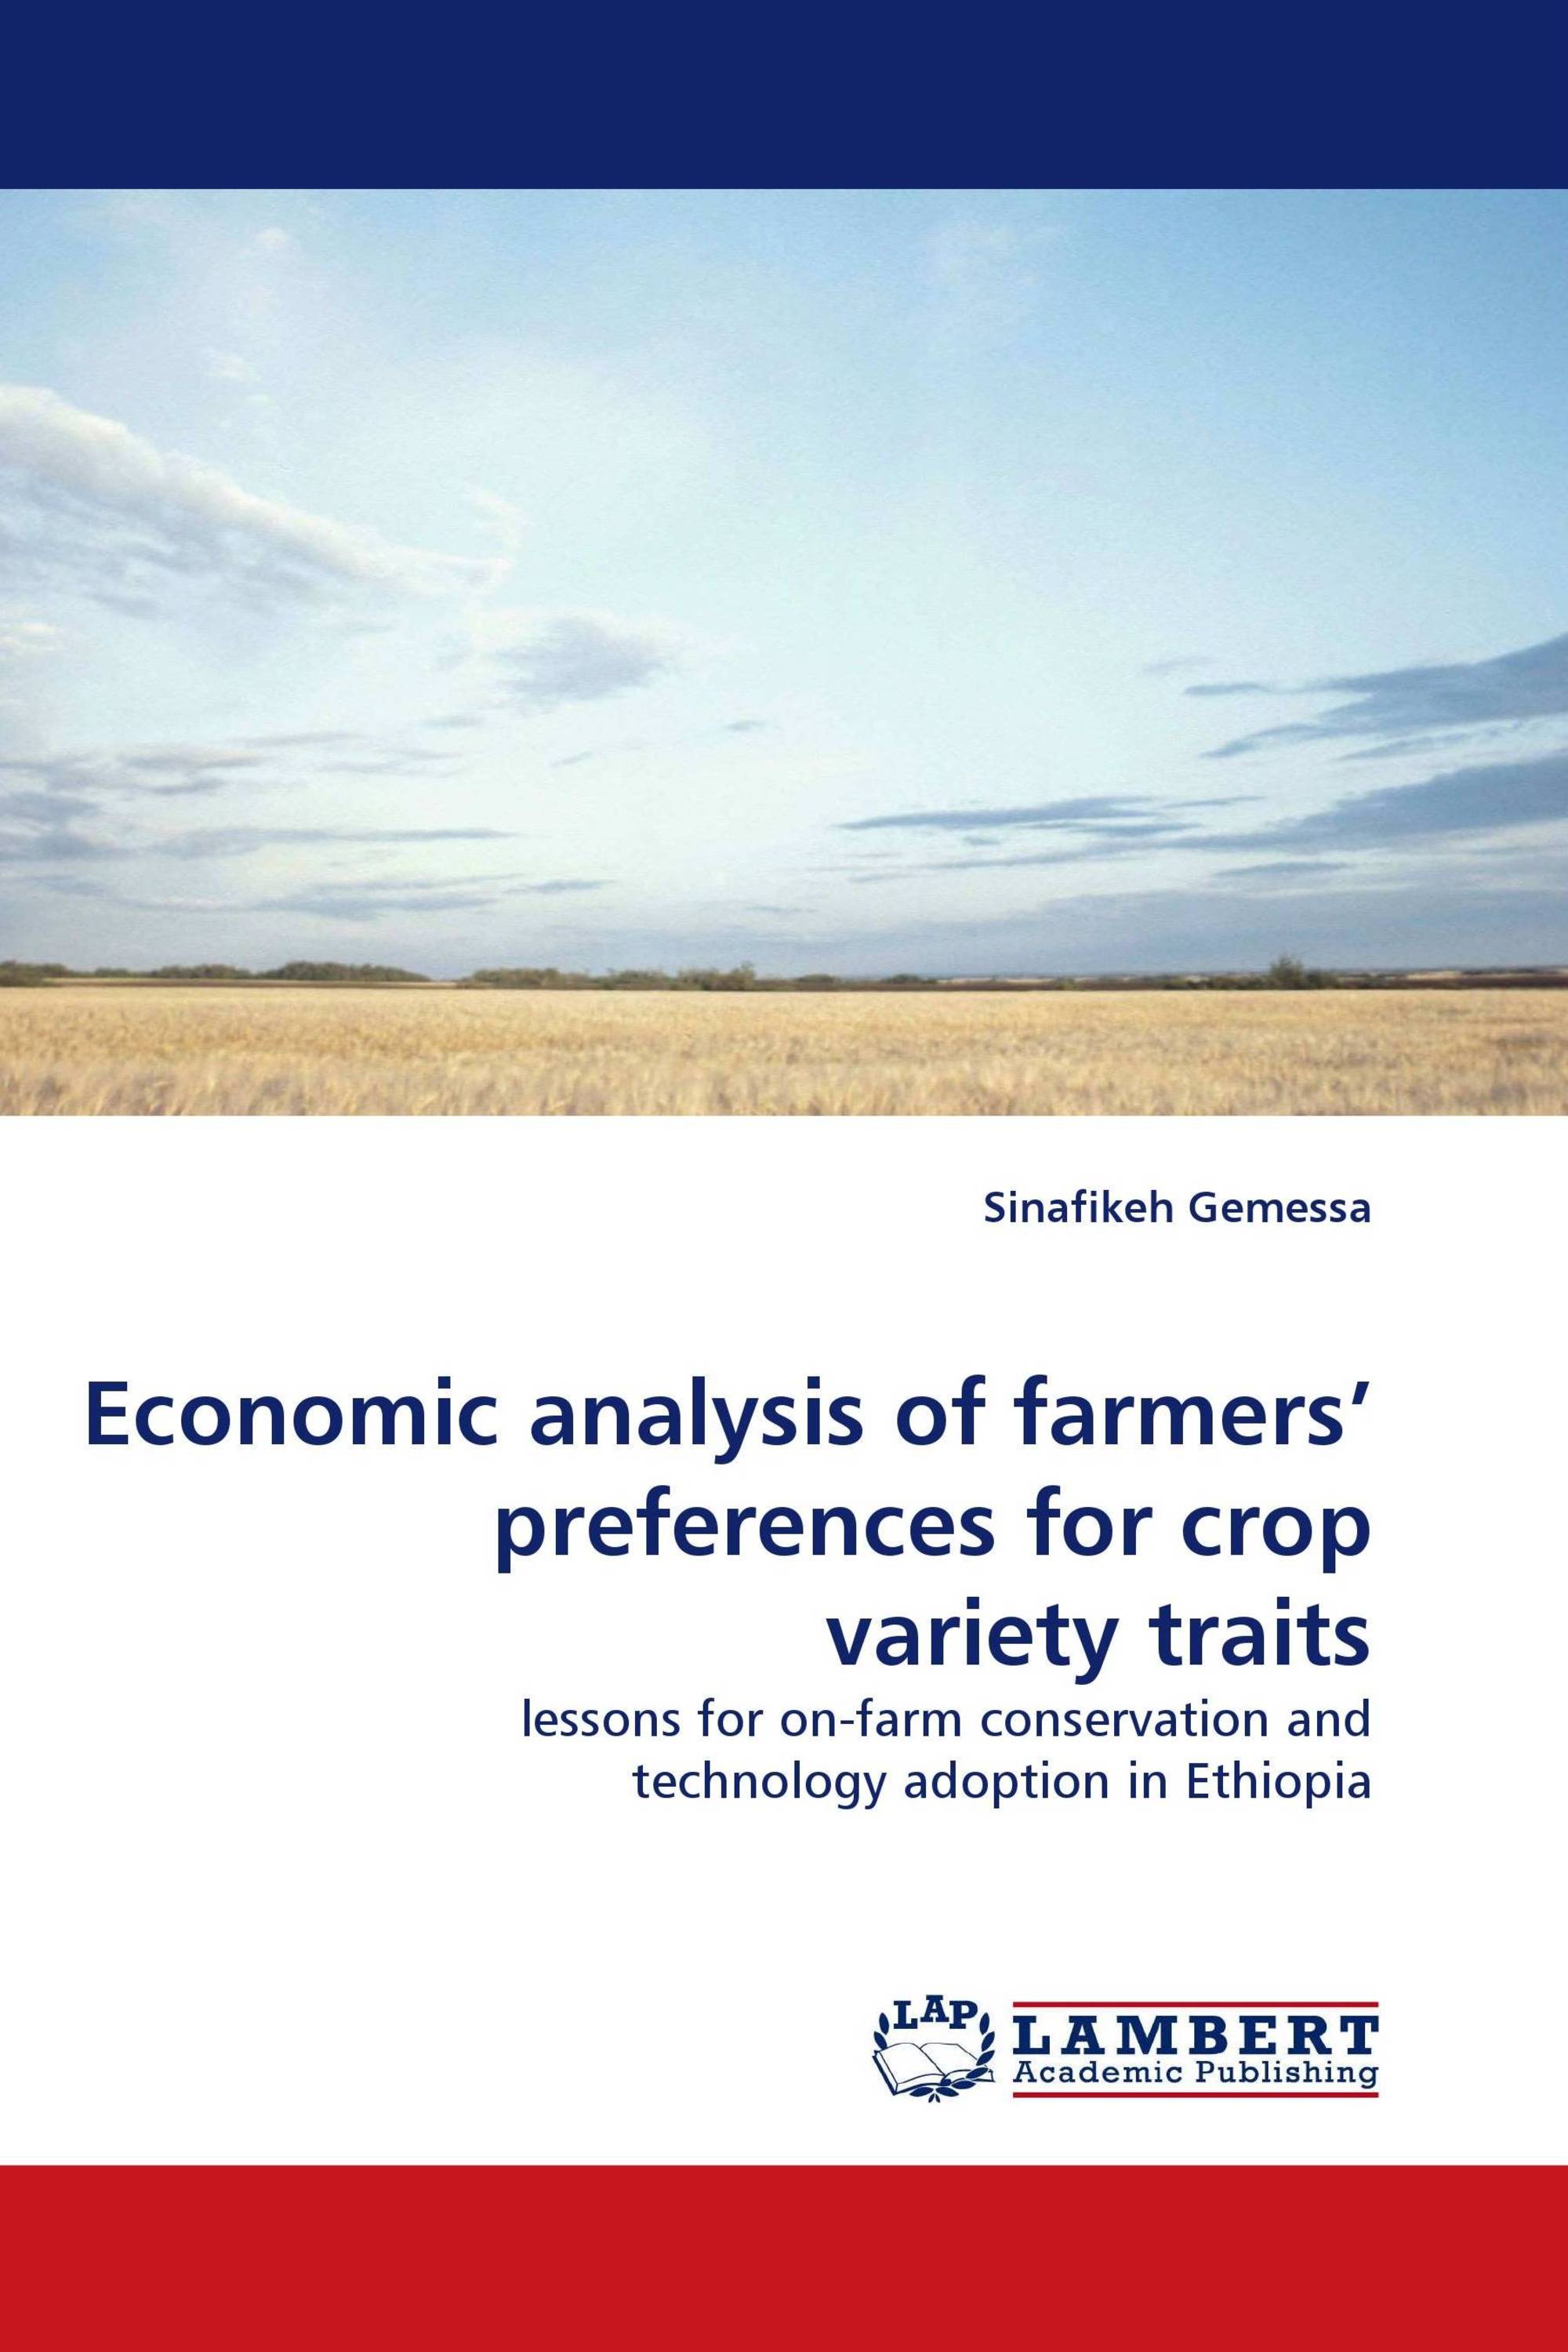 Economic analysis of farmers’ preferences for crop variety traits